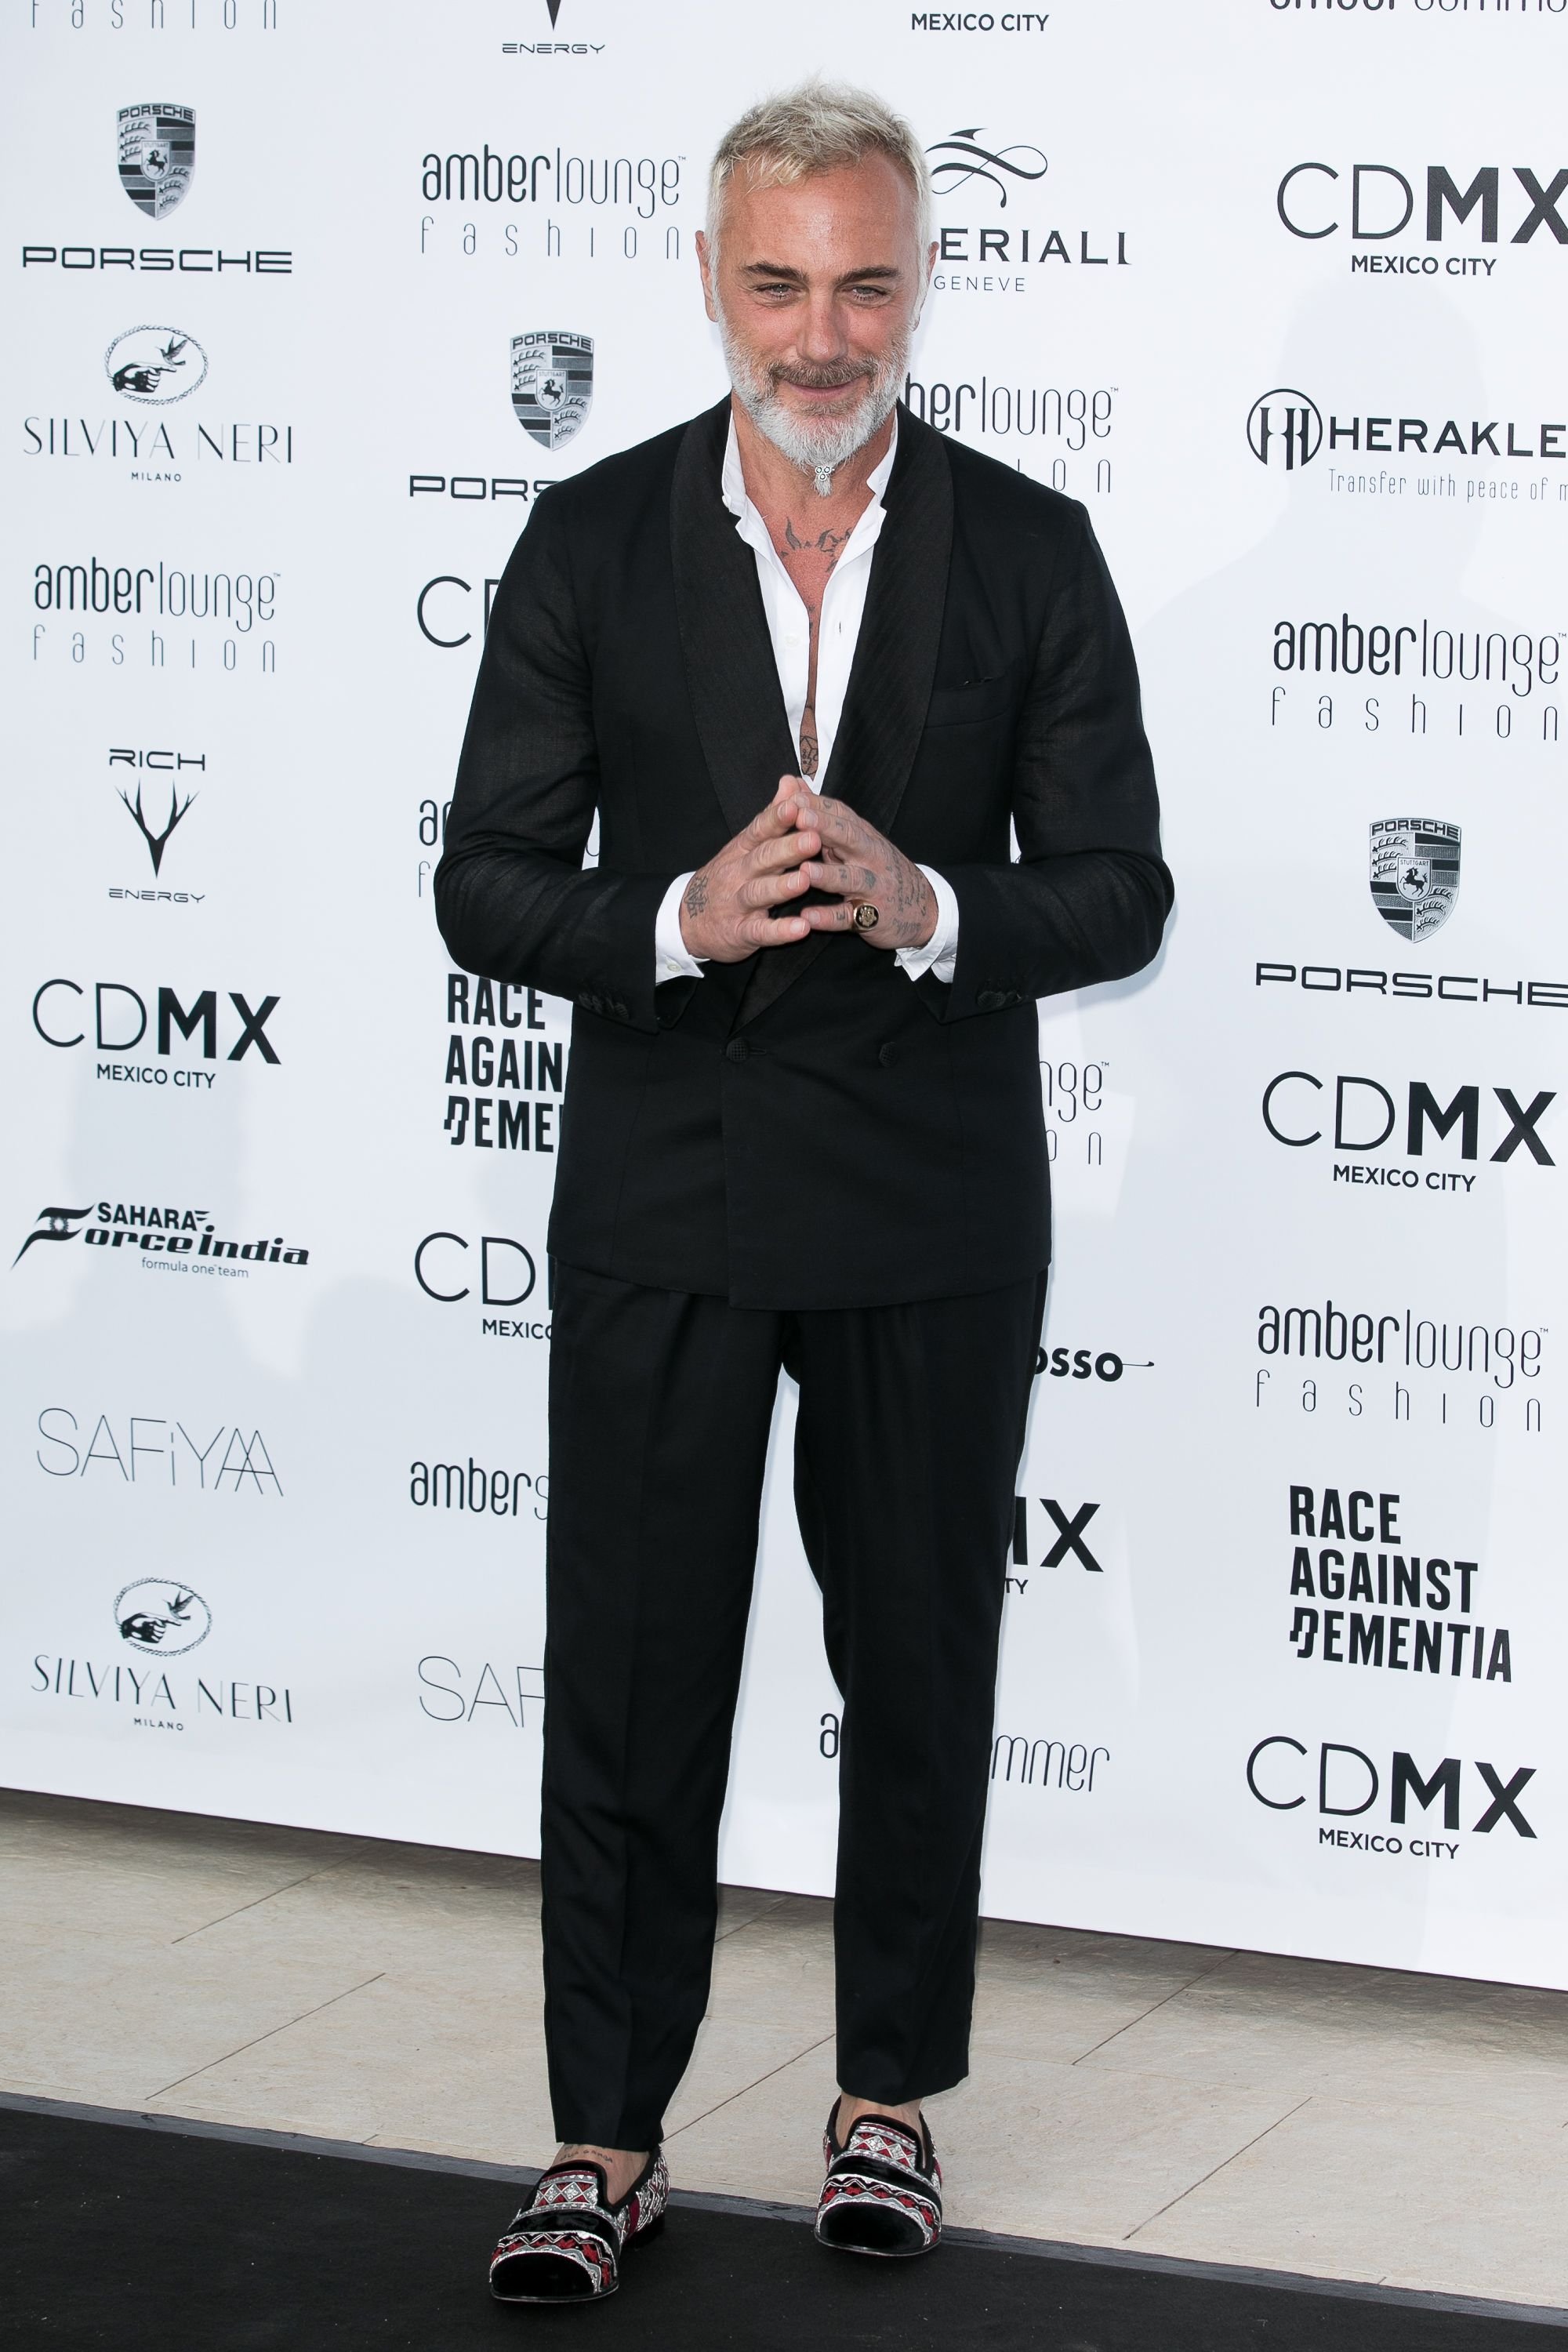 Gianluca Vacchi at the Amber Lounge Fashion Monaco at Le Meridien Beach Plaza Hotel on May 26, 2017, in Monaco | Photo: Marc Piasecki/Getty Images